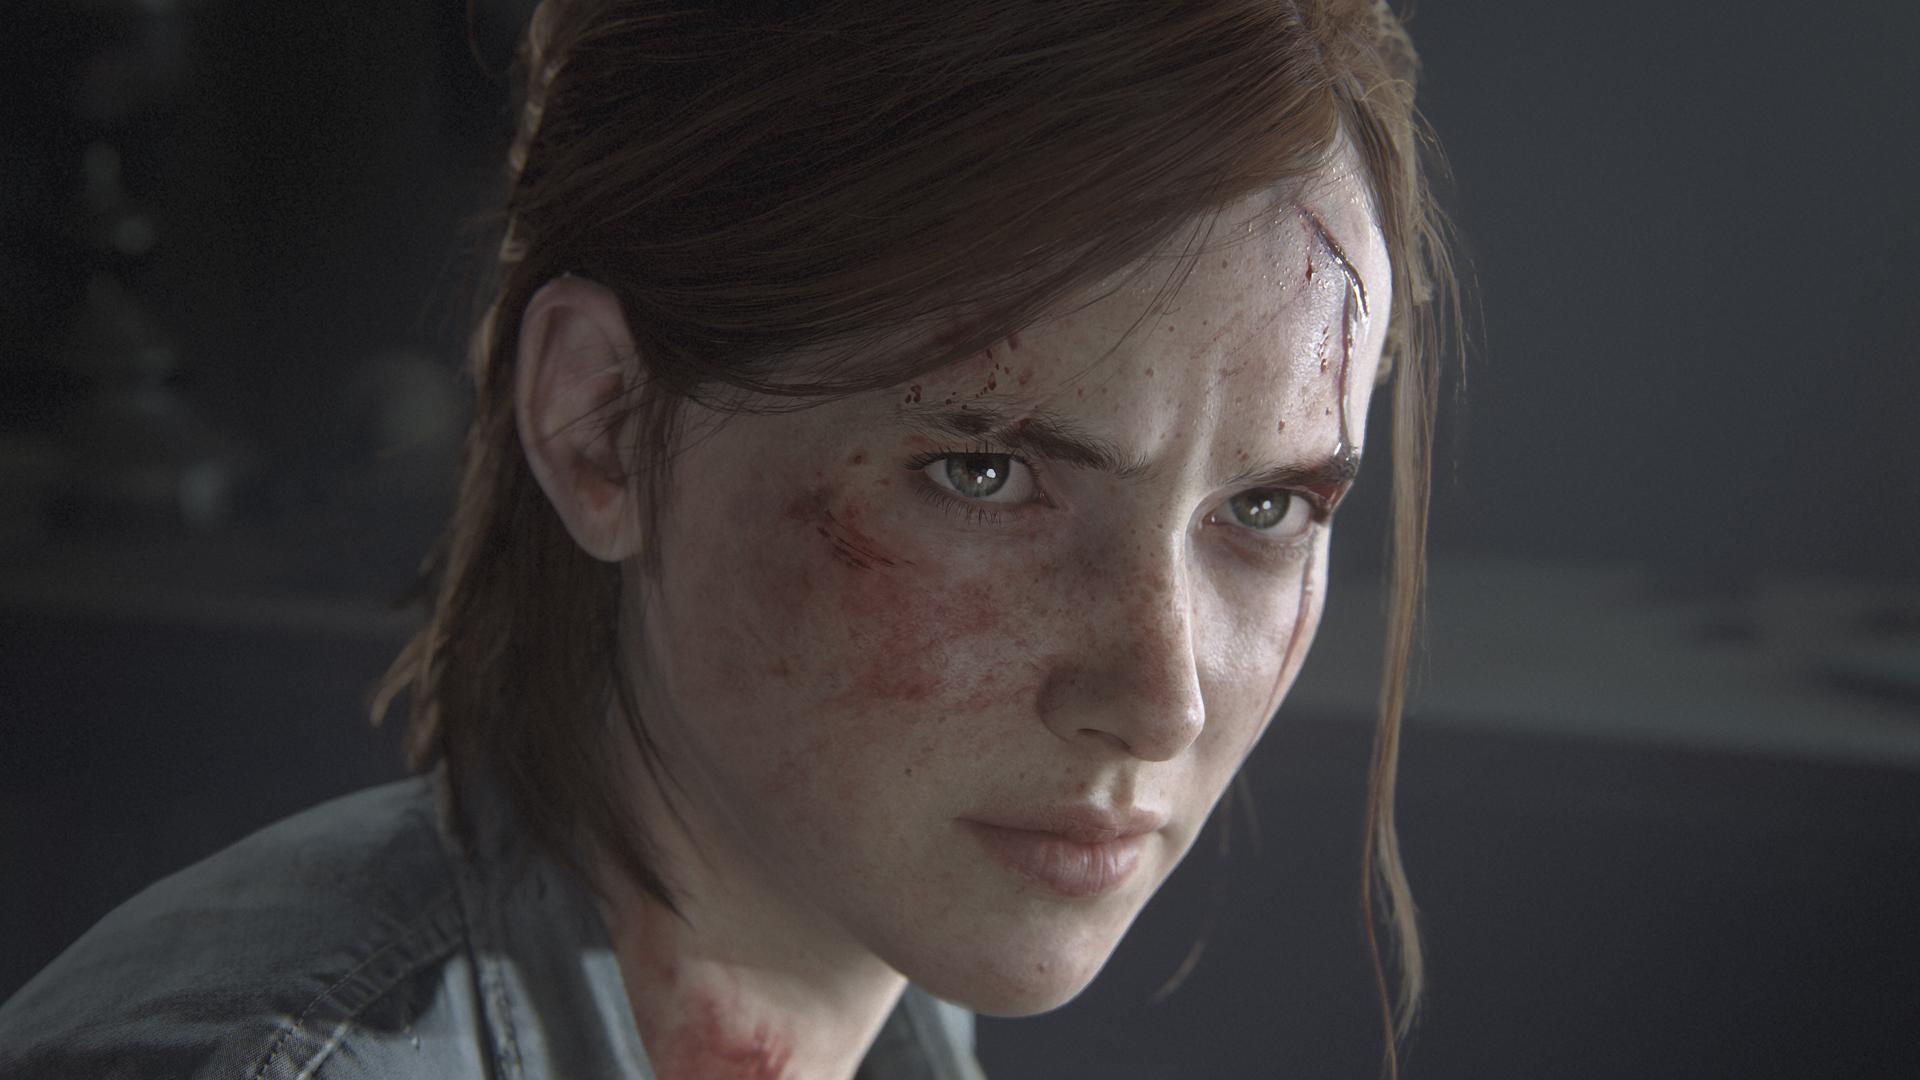 The Last of Us 2 release delayed to spring 2020